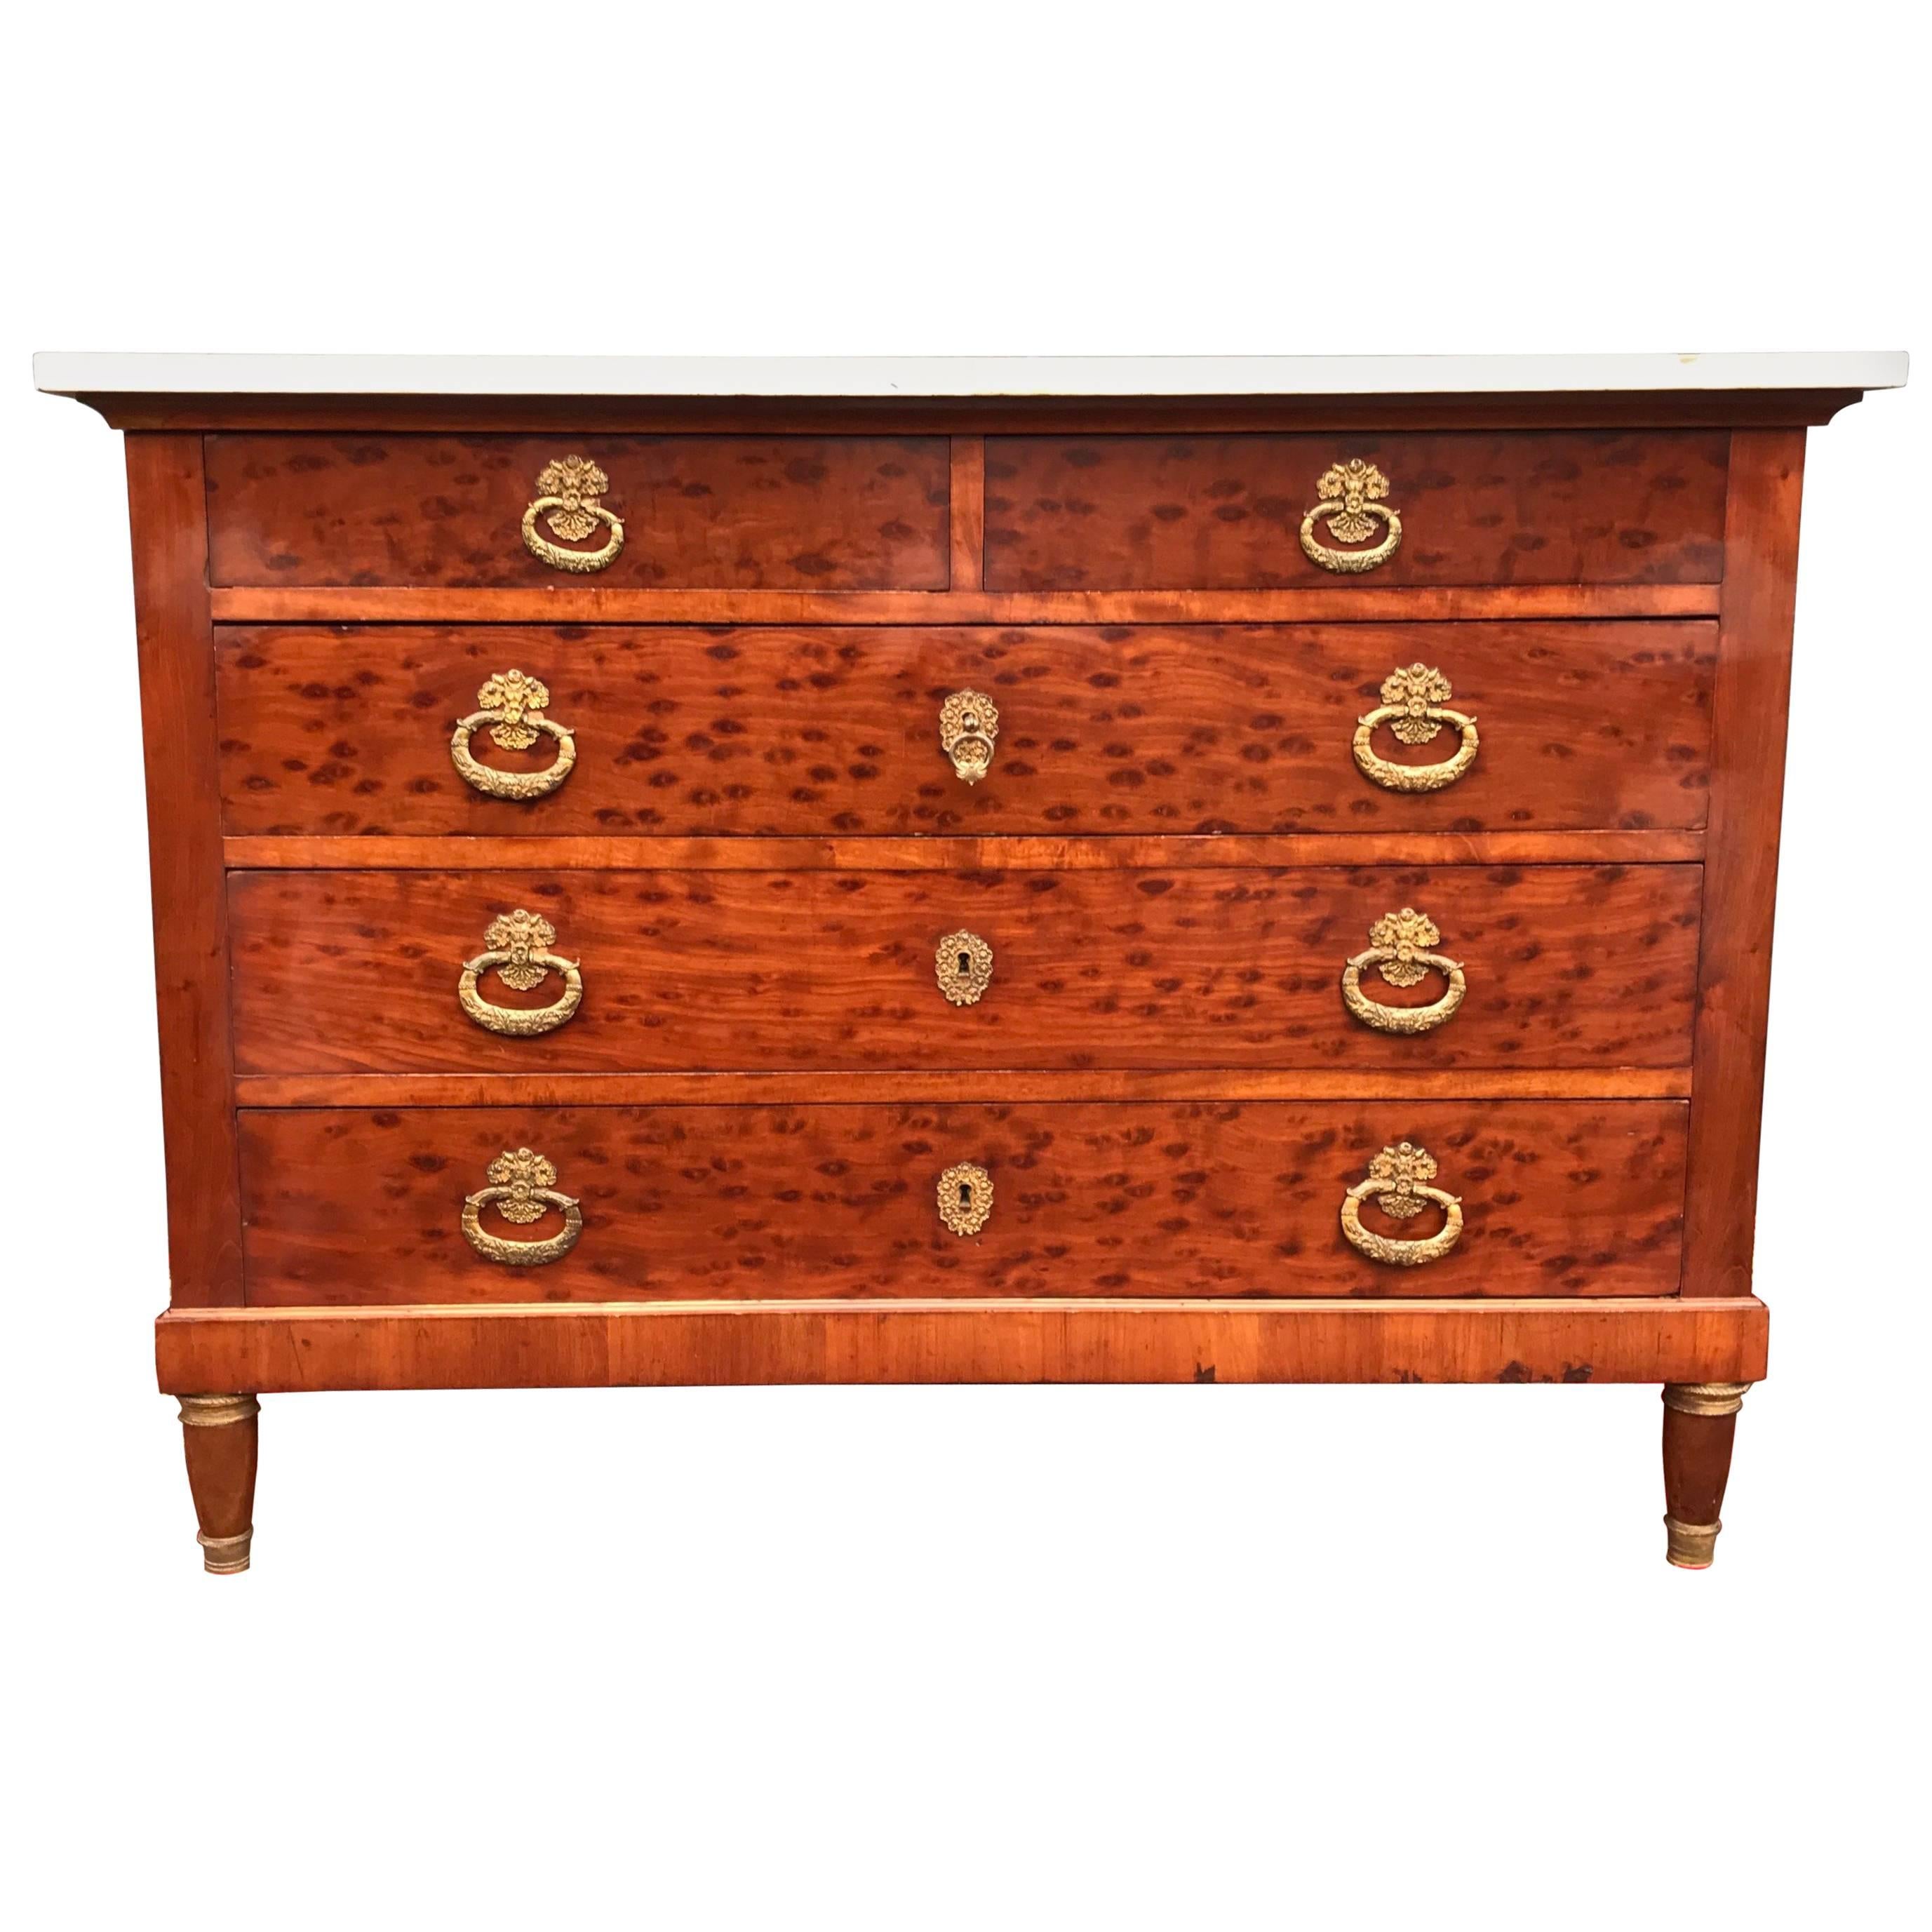 Antique Empire Style Chest of Drawers or Commode Burl Wood, Bronze, Marble Top For Sale